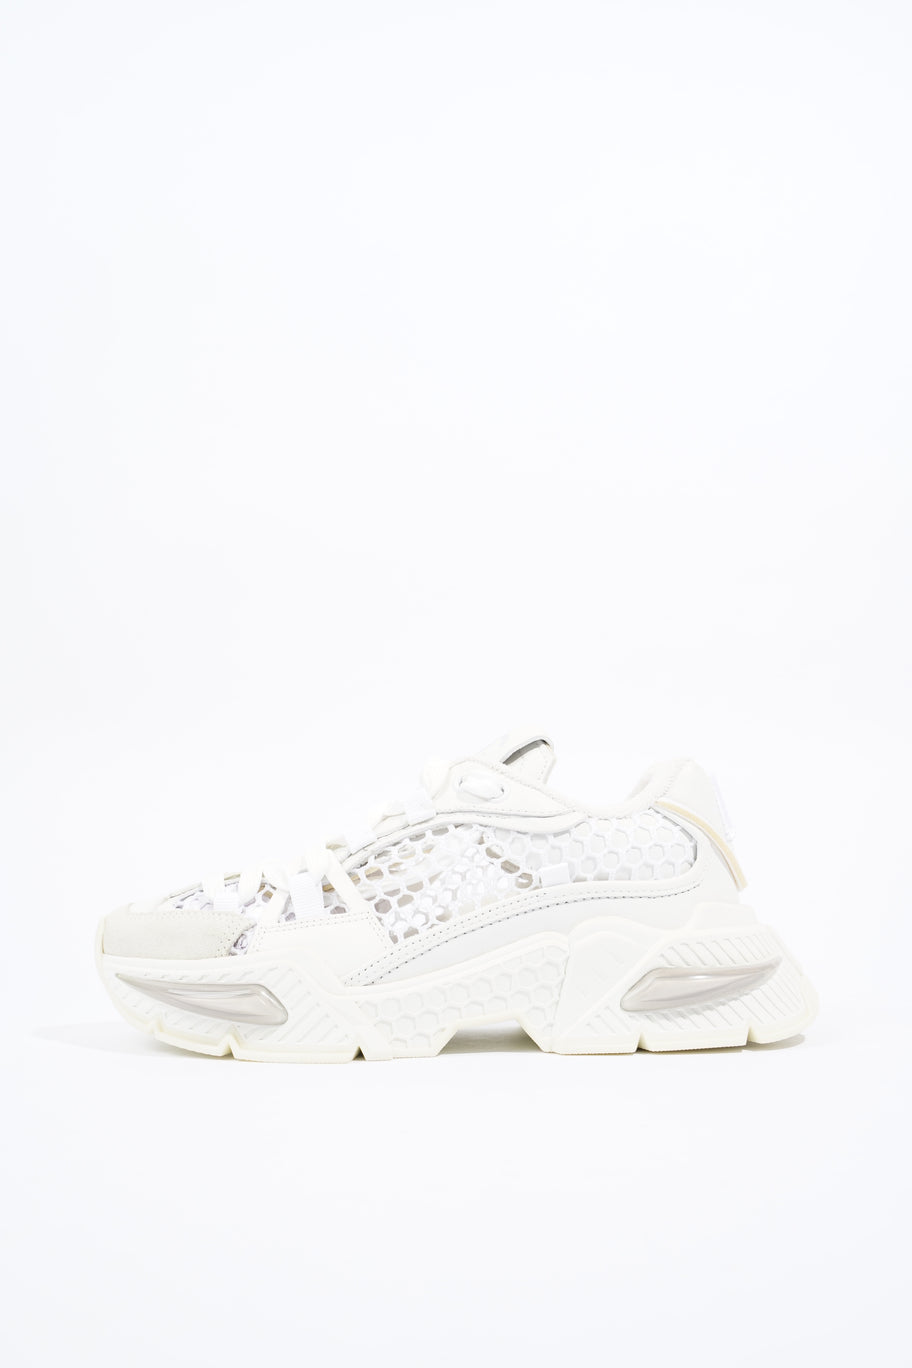 Airmaster Sneakers White Leather EU 37.5 UK 4.5 Image 5